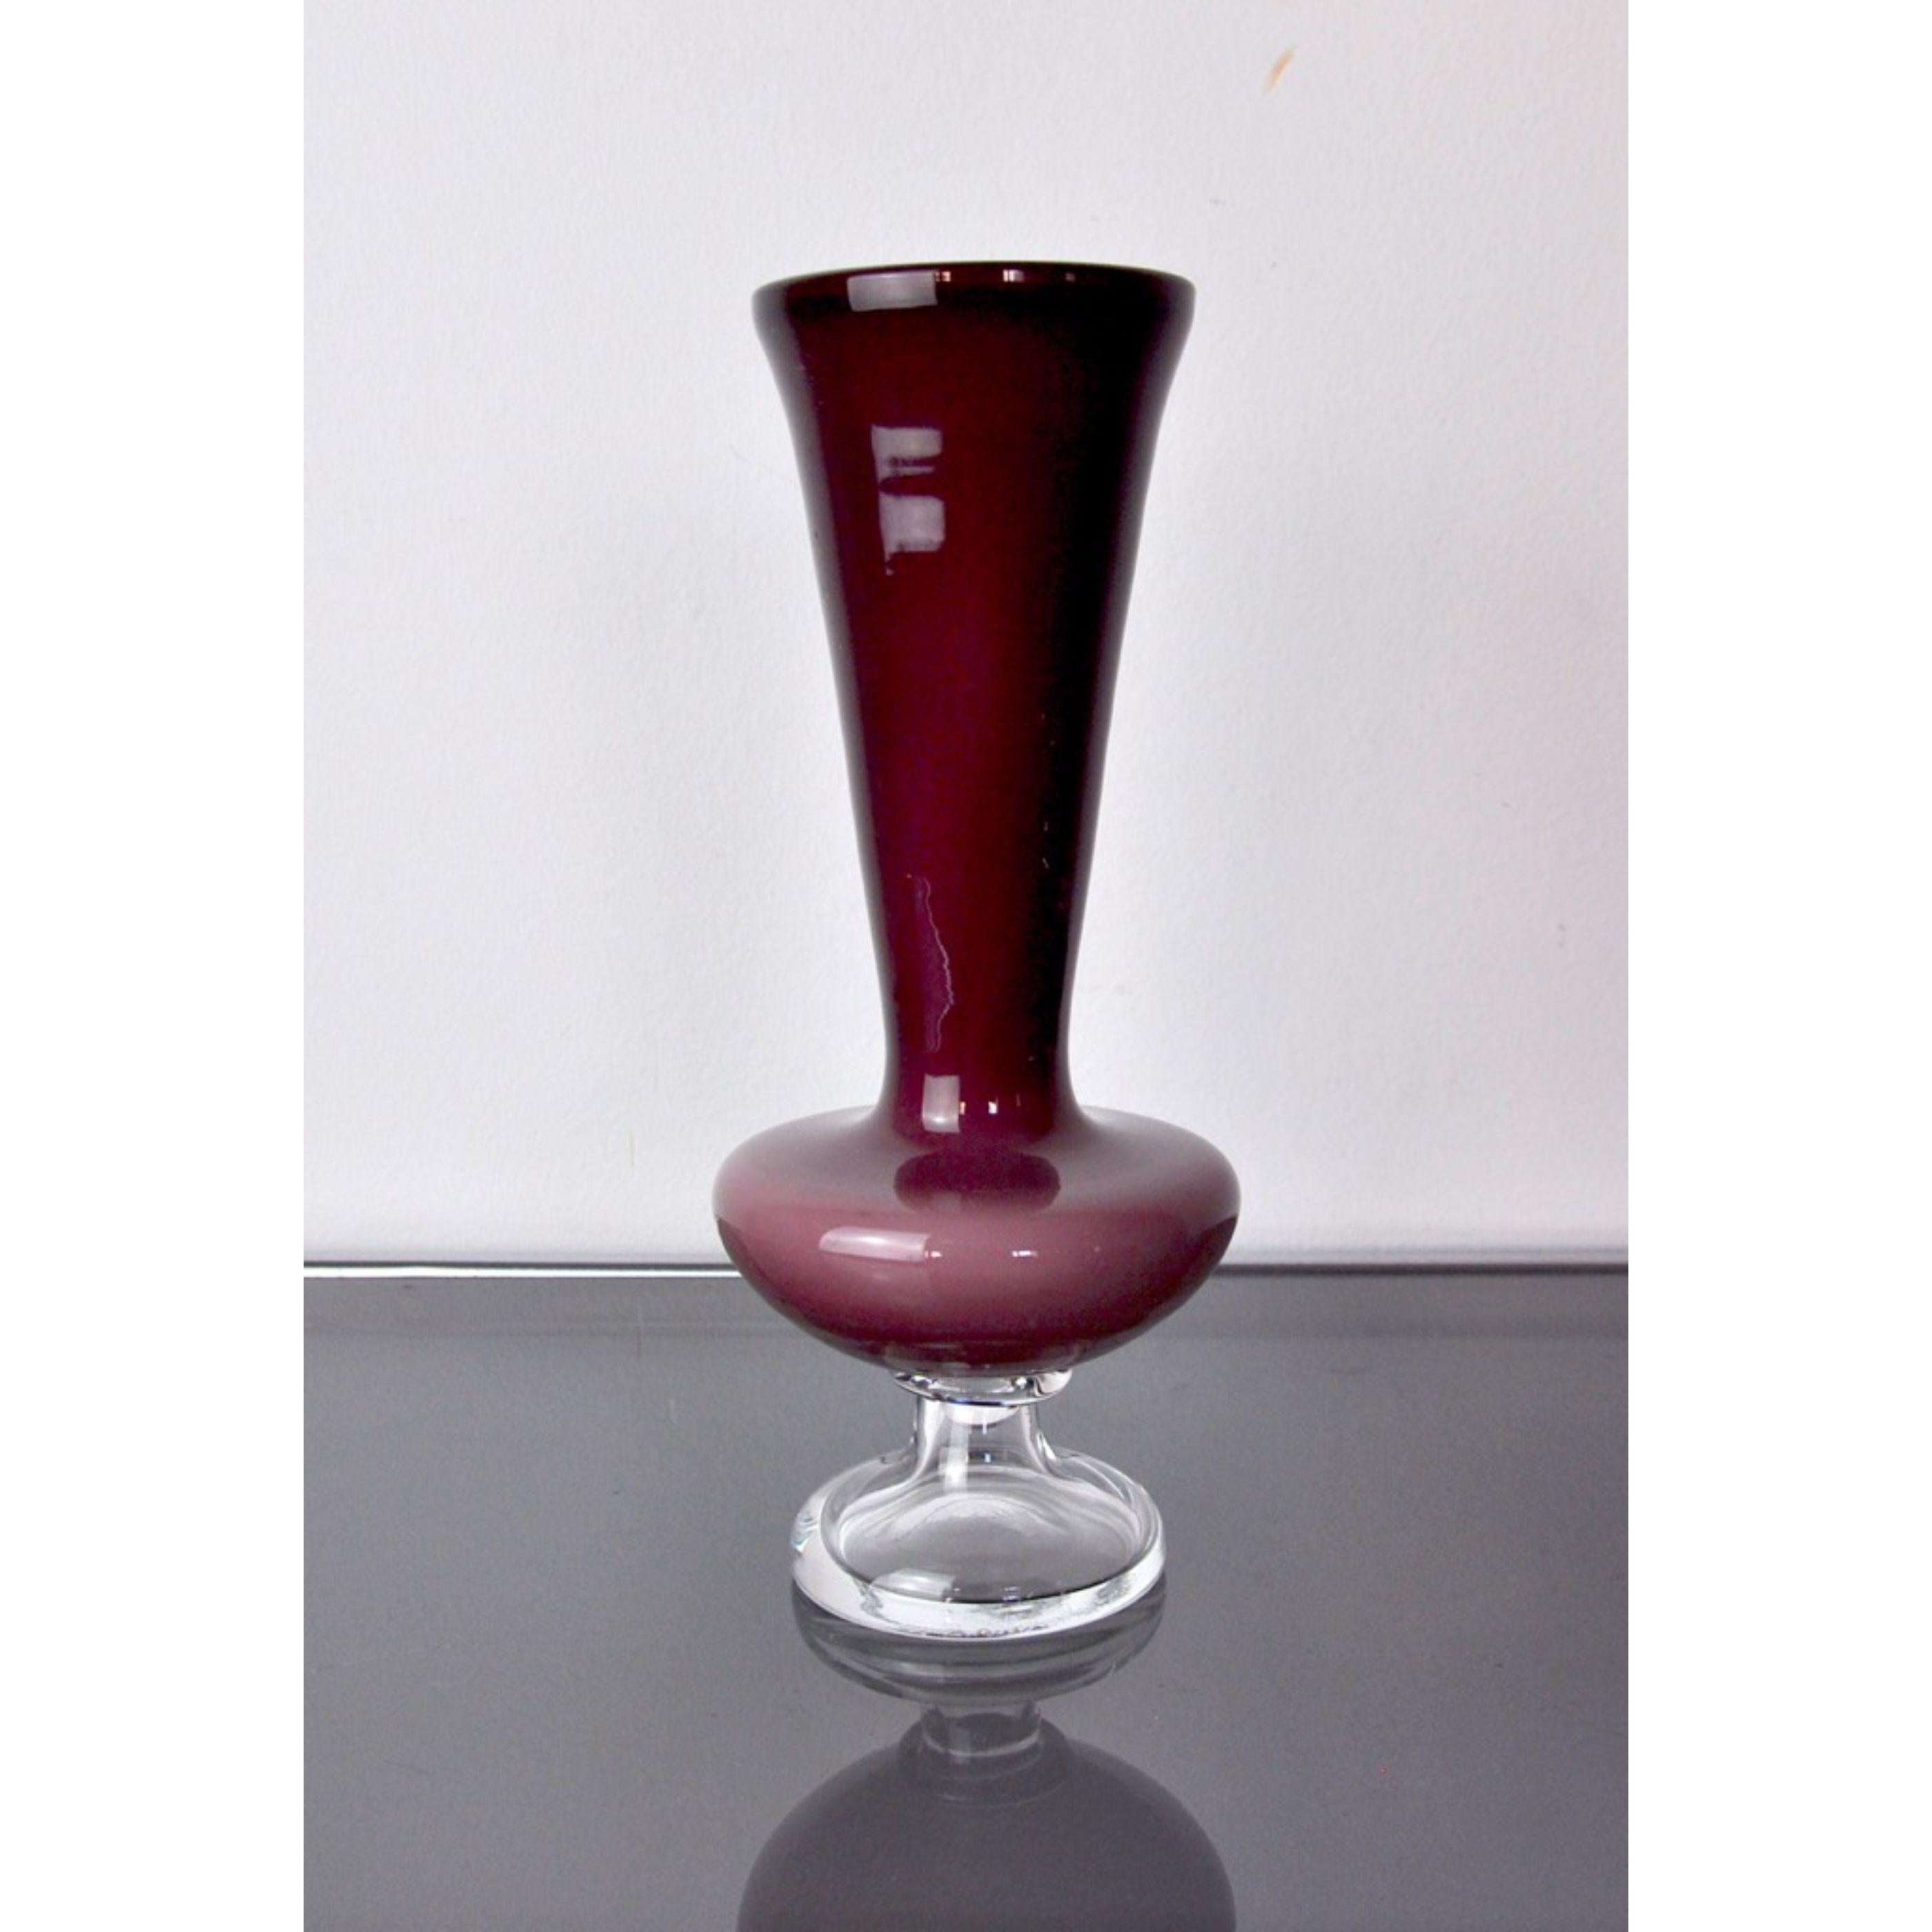 Vase in purple and transparent italian art glass sommerso blown by hand.

Attributed to seguso, murano Italy, 1970s.

This colorful vase has a beautiful design.

Use it as a decorative vase and display it with other murano glass pieces to